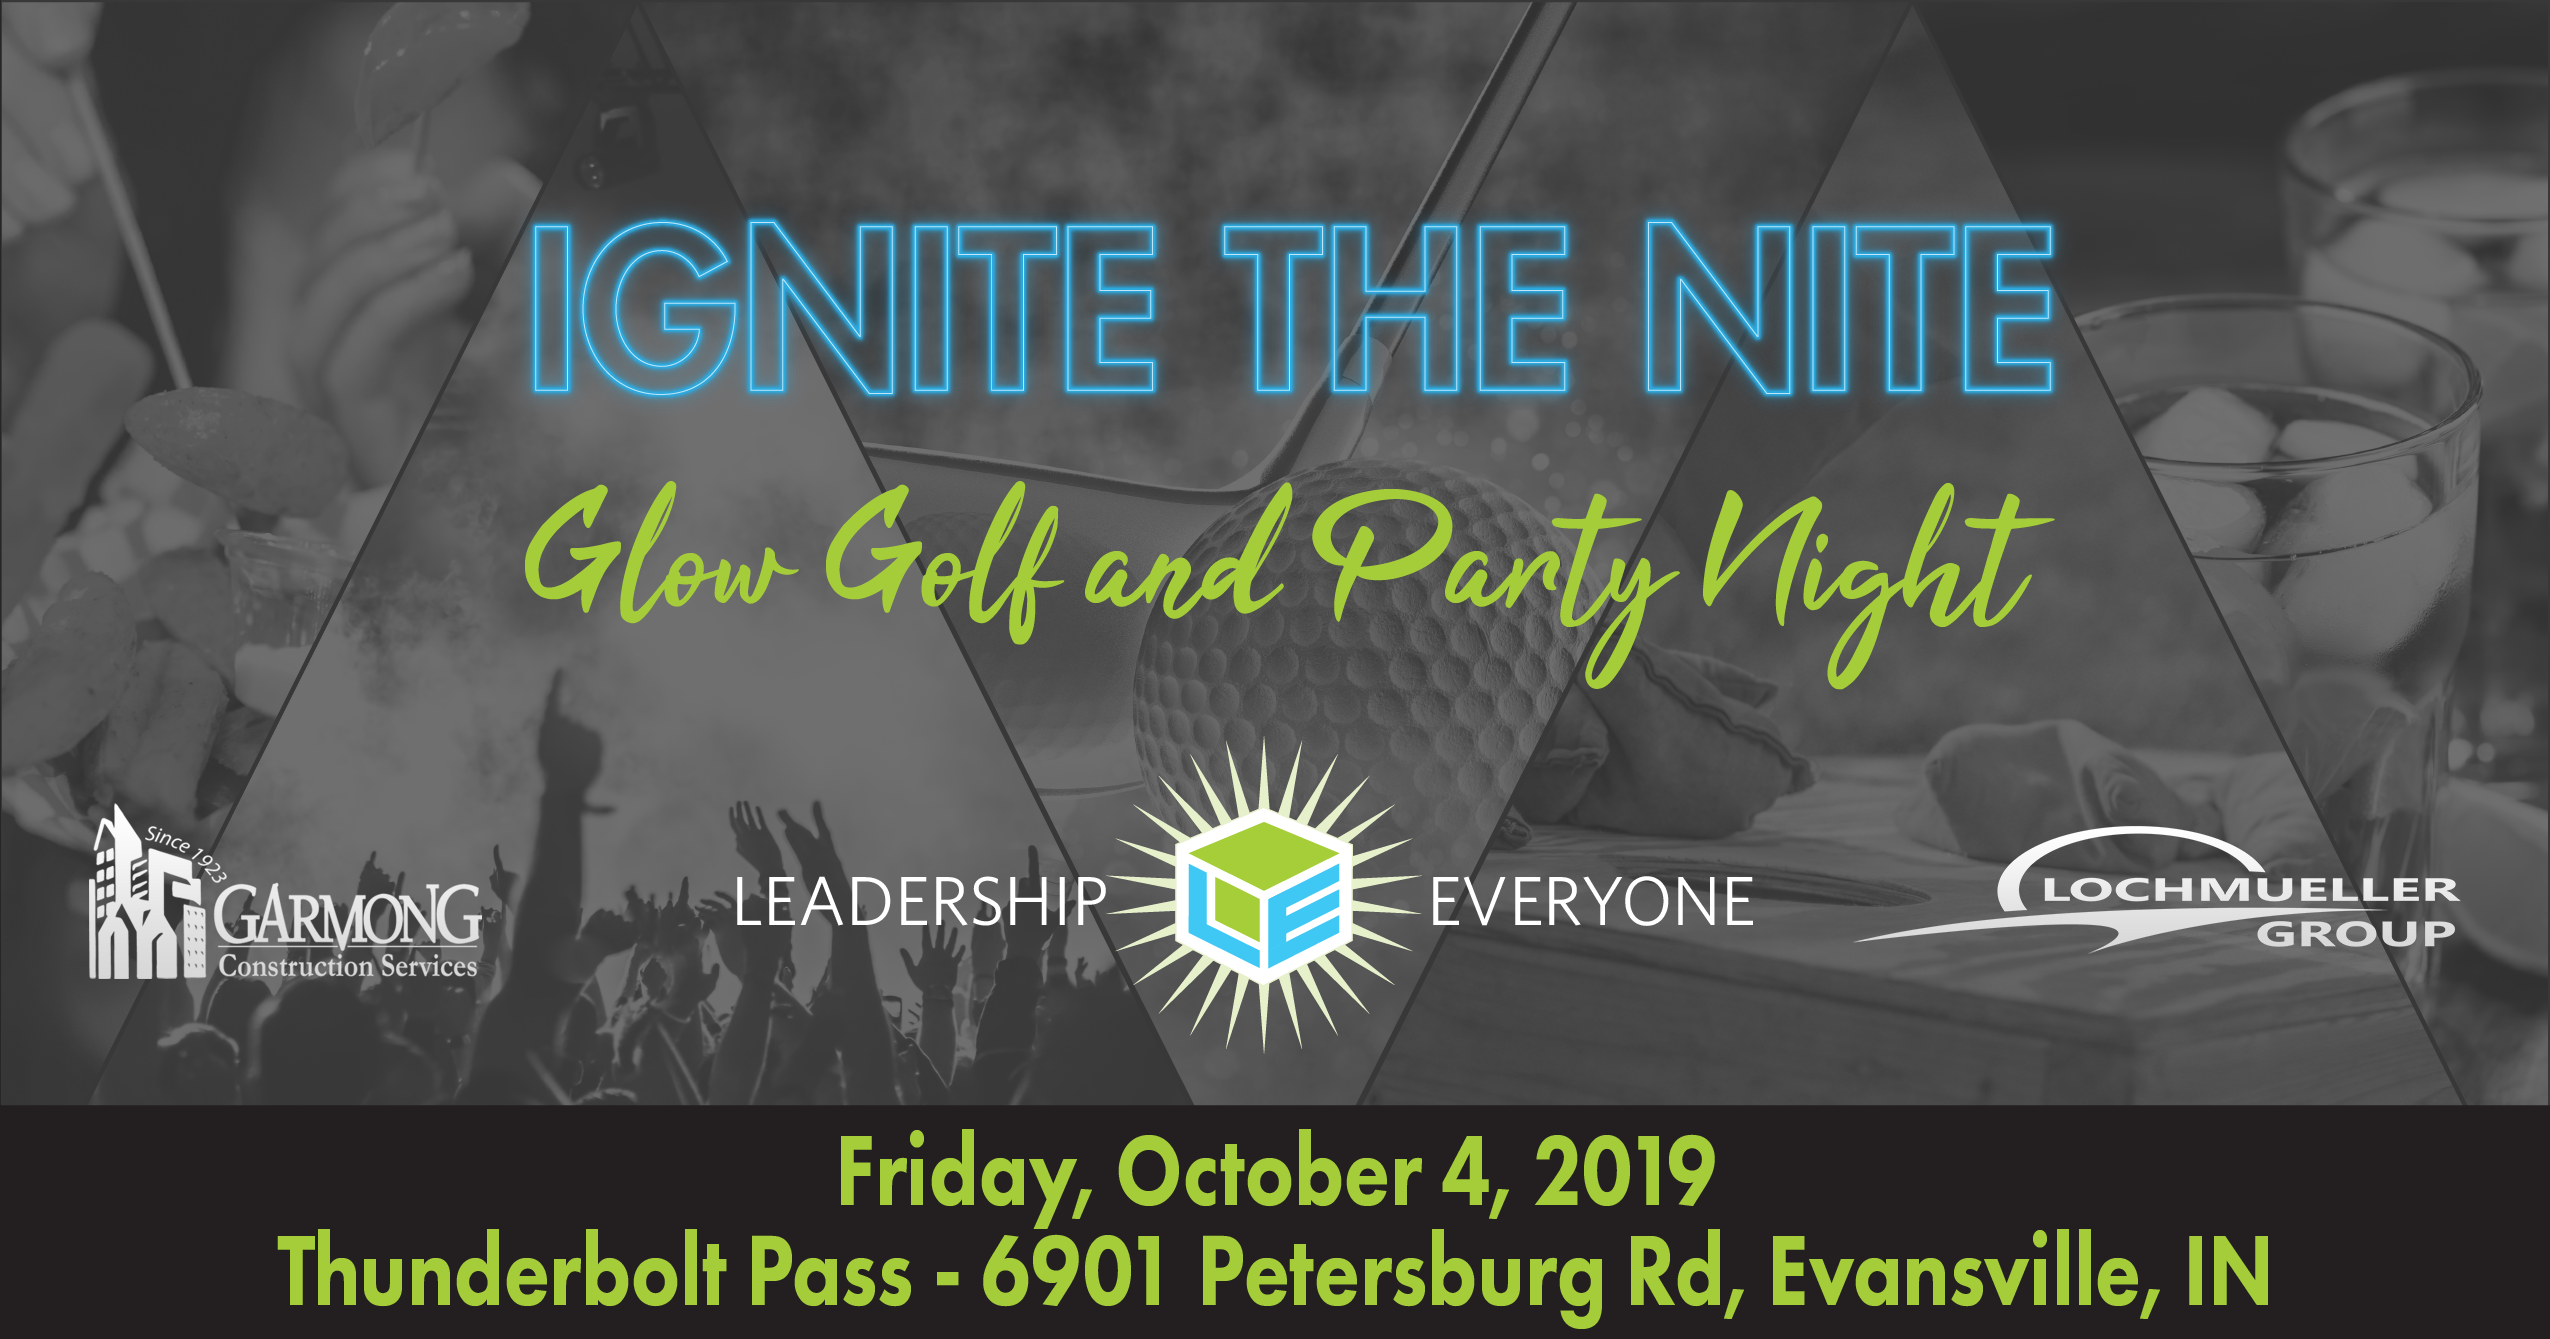 Ignite the Nite Glow Golf and Party Night